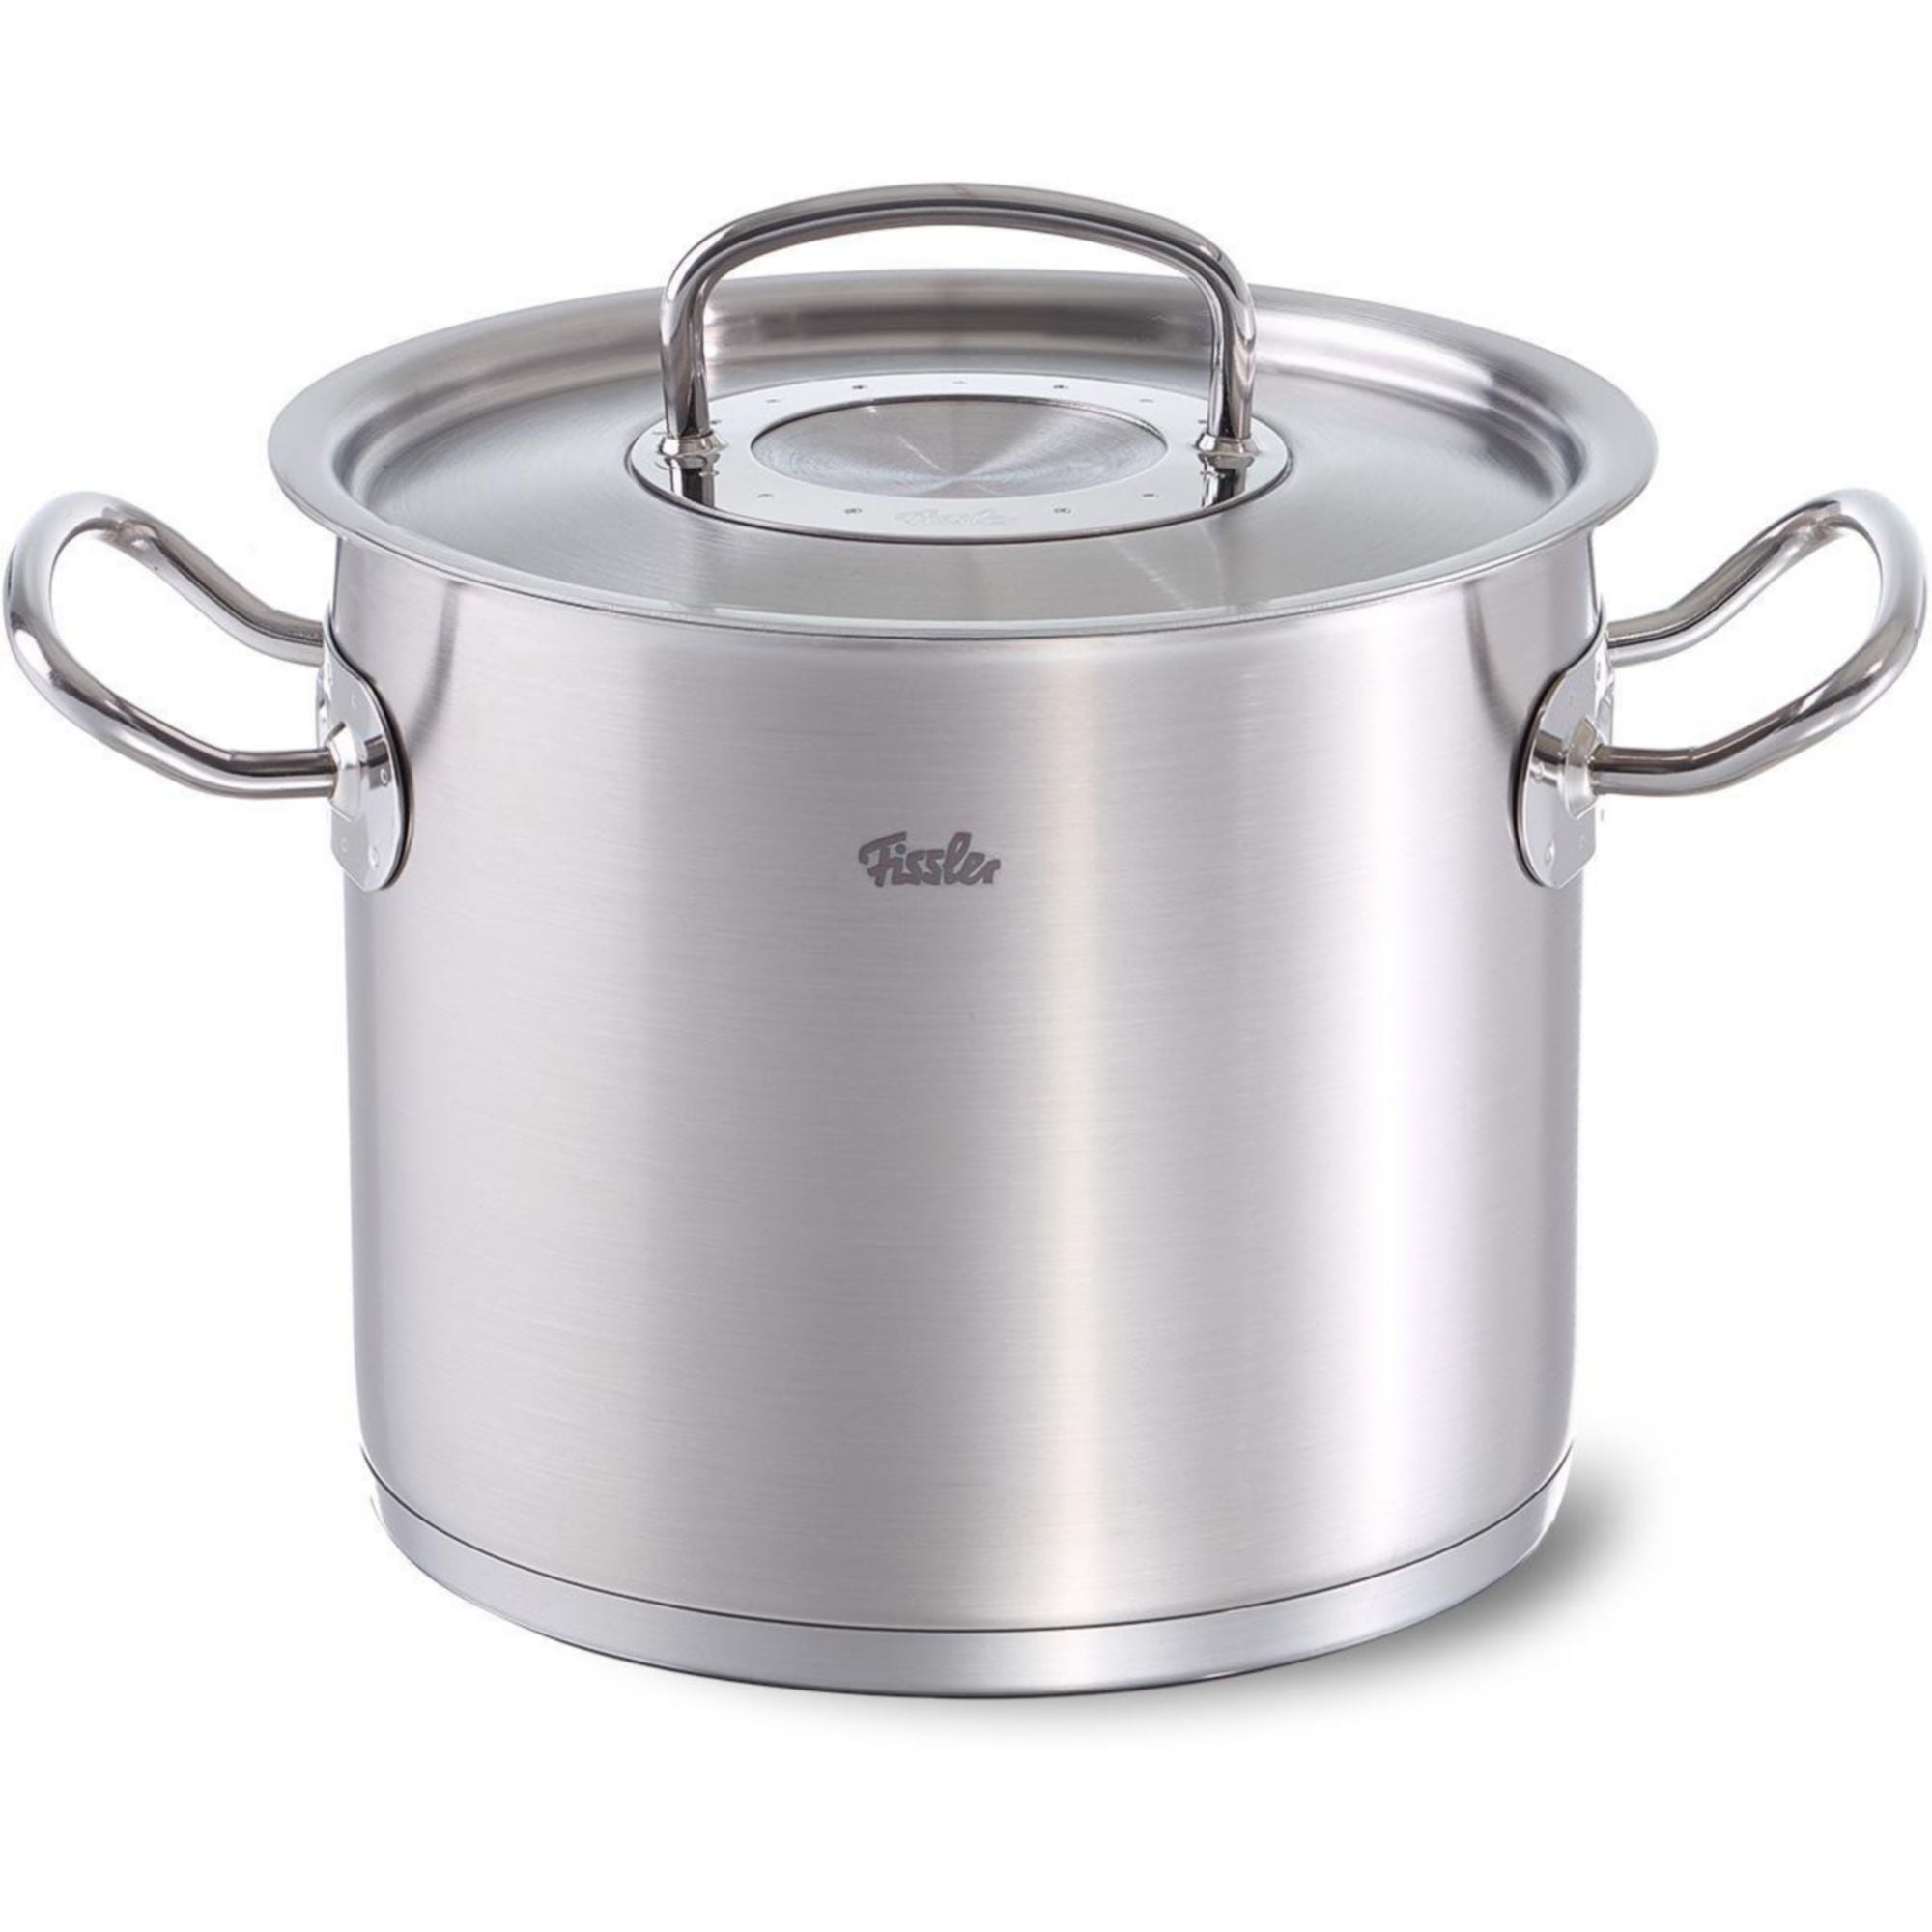 Original-Profi 2019 Steel Tall Quart Stock with 9.6 Stainless Collection® Pot Fissler Lid,